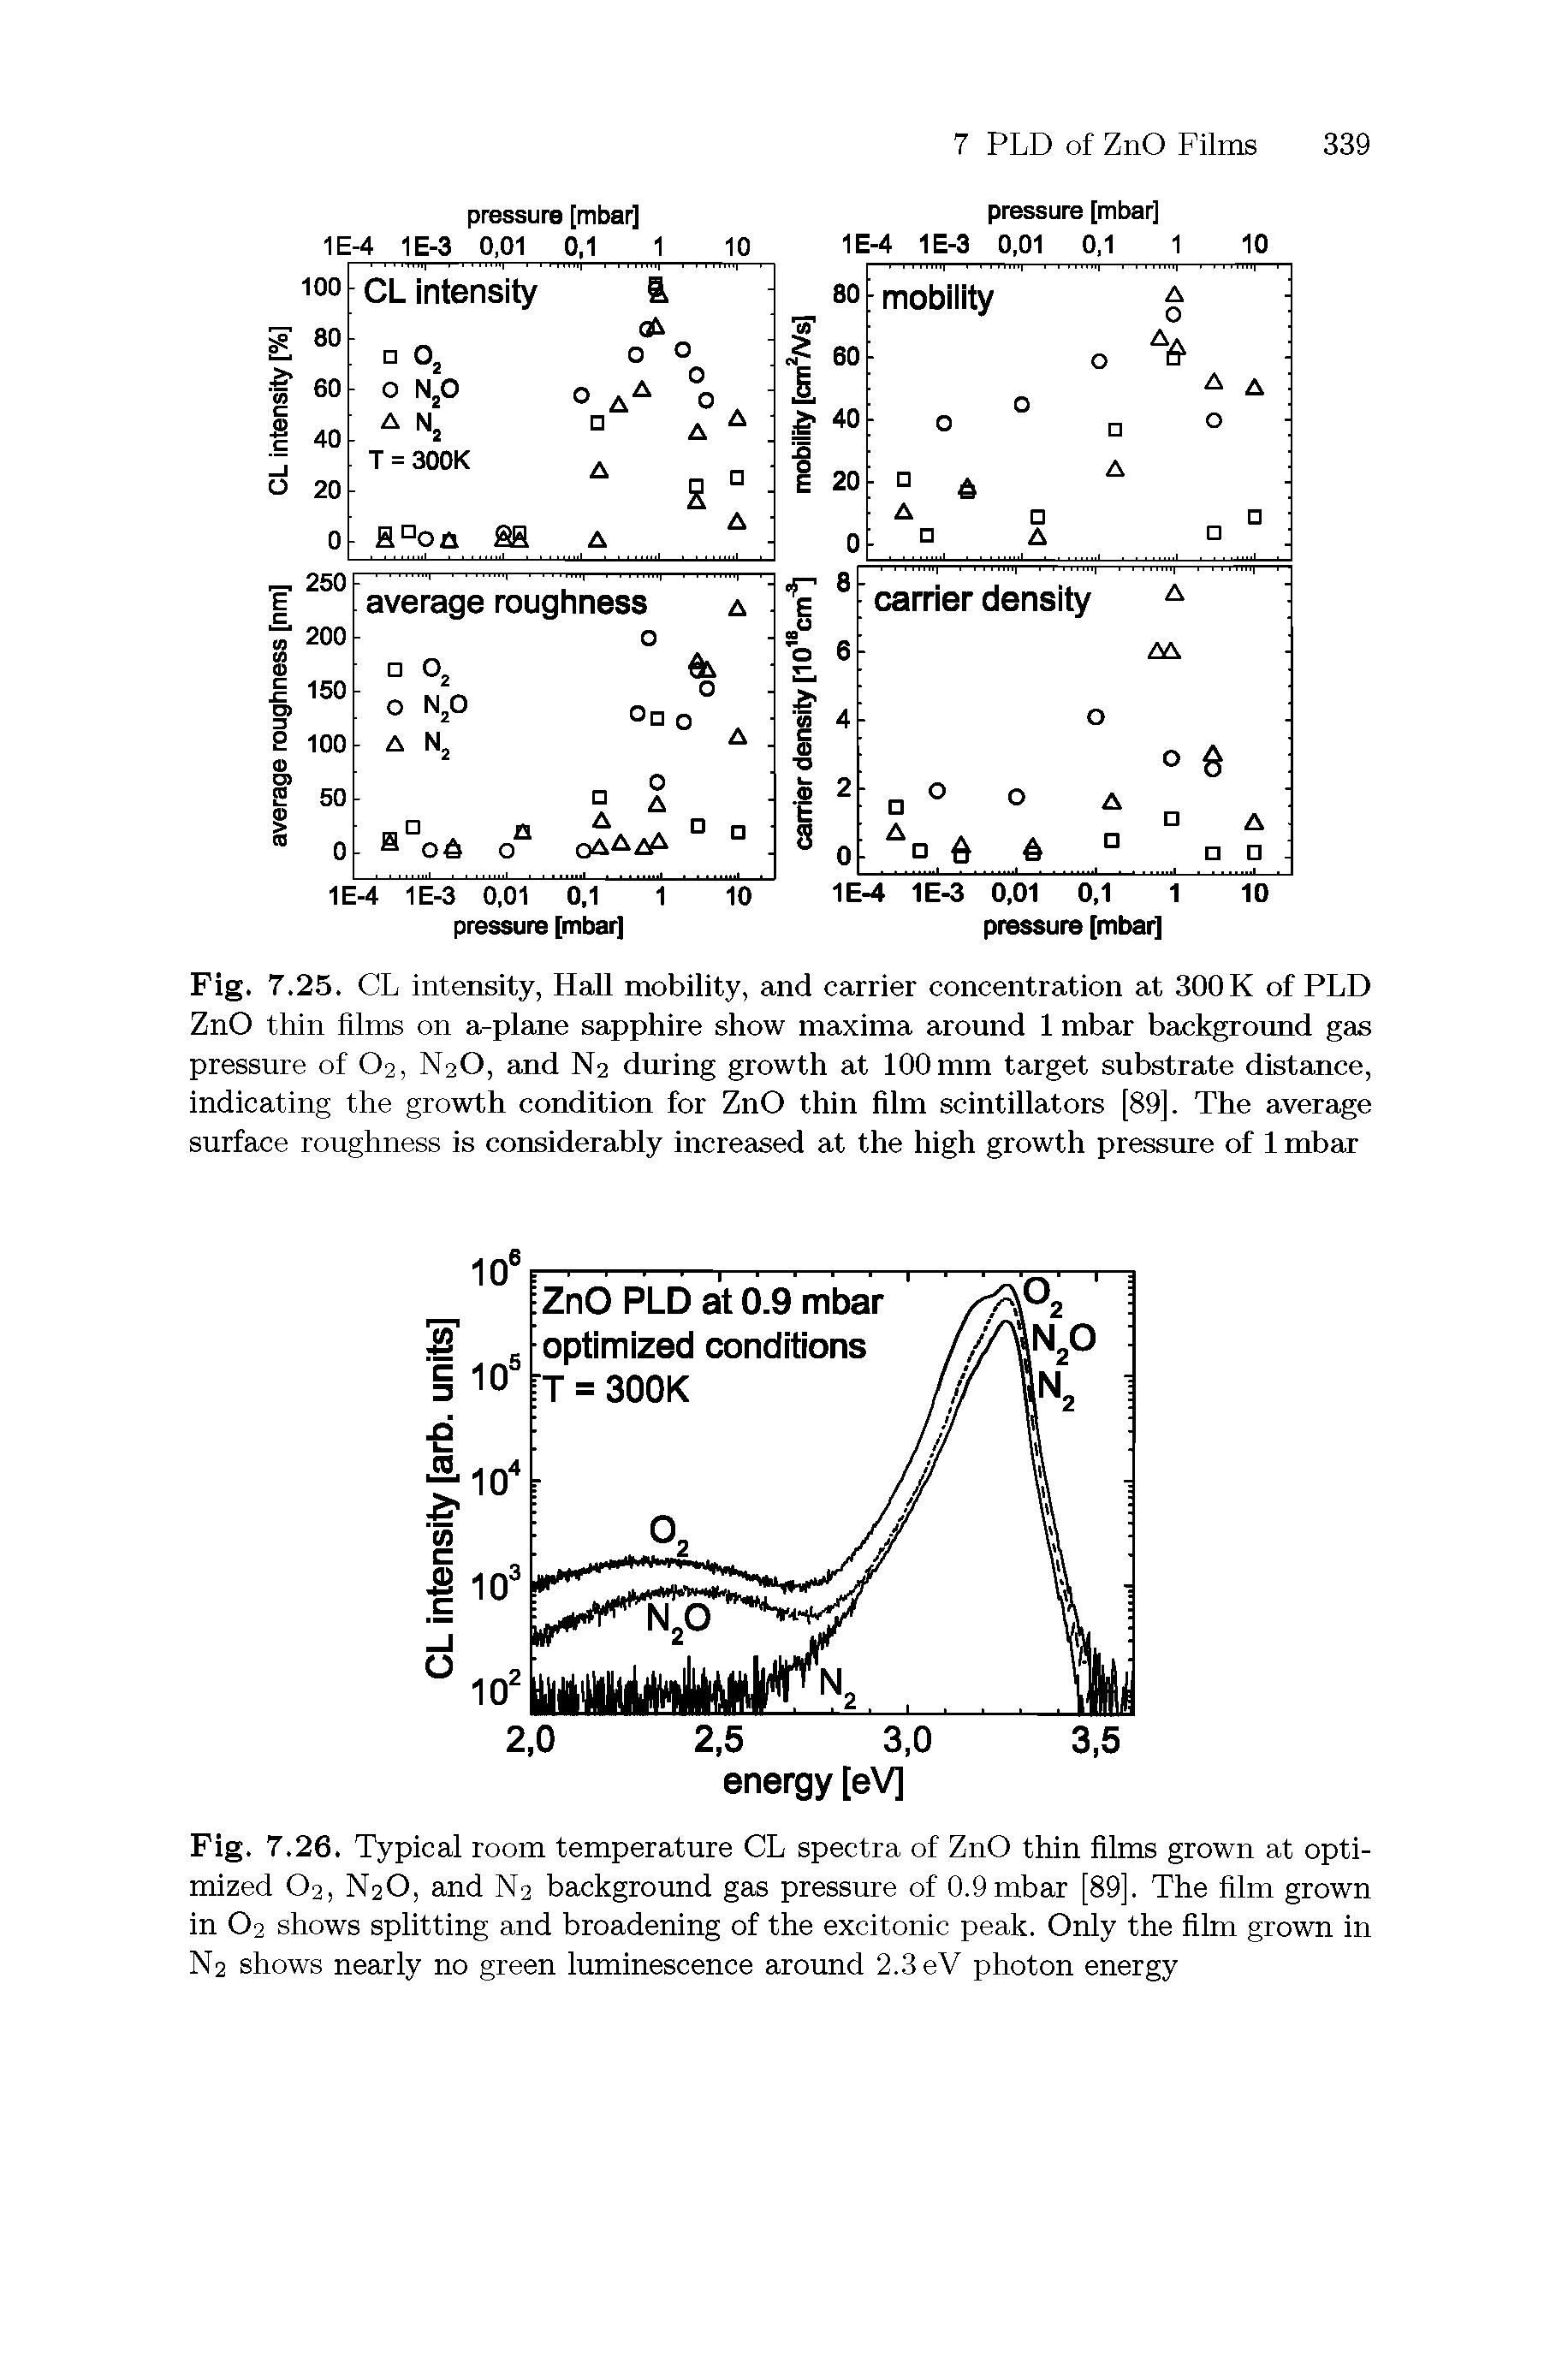 Fig. 7.26. Typical room temperature CL spectra of ZnO thin films grown at optimized O2, N2O, and N2 background gas pressure of 0.9mbar [89], The film grown in O2 shows splitting and broadening of the excitonic peak. Only the film grown in N2 shows nearly no green luminescence around 2.3 eV photon energy...